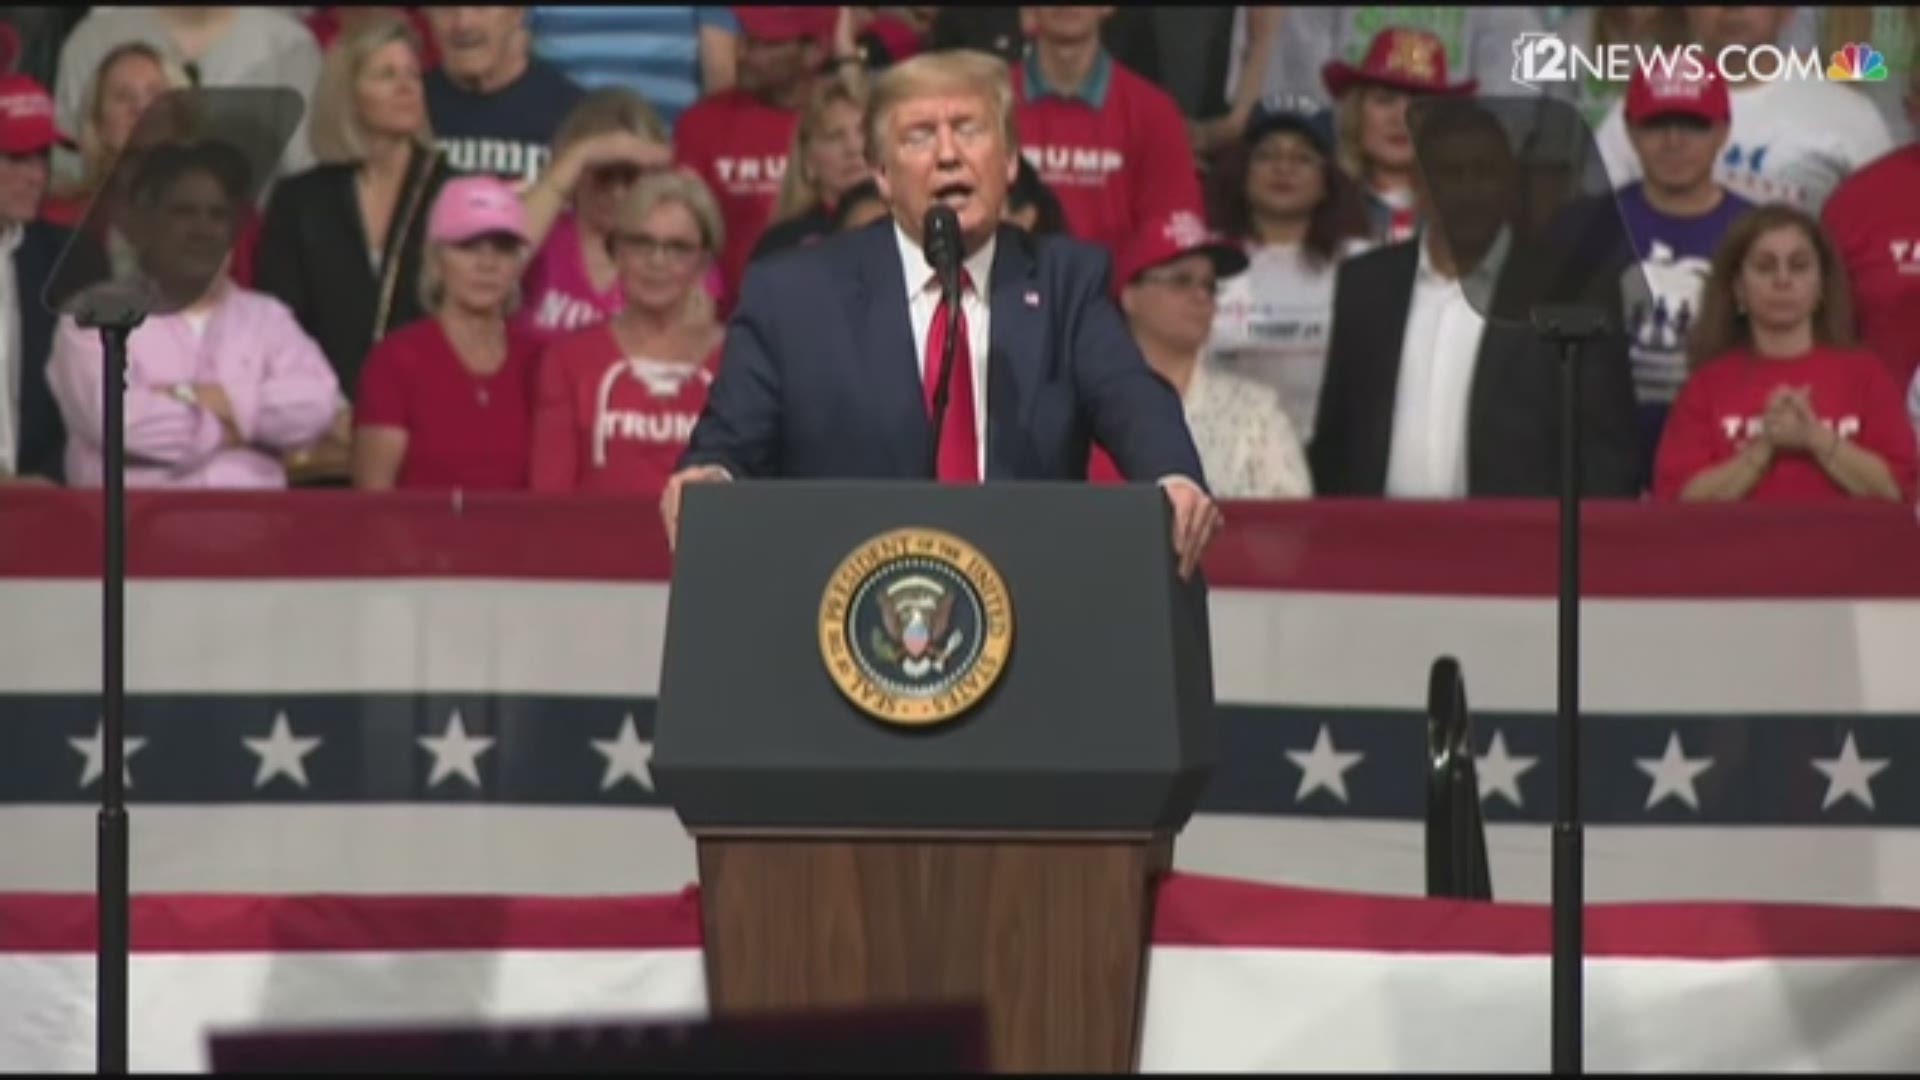 At his campaign rally in Phoenix, President Trump claimed that record unemployment is seen throughout all demographics of American society.